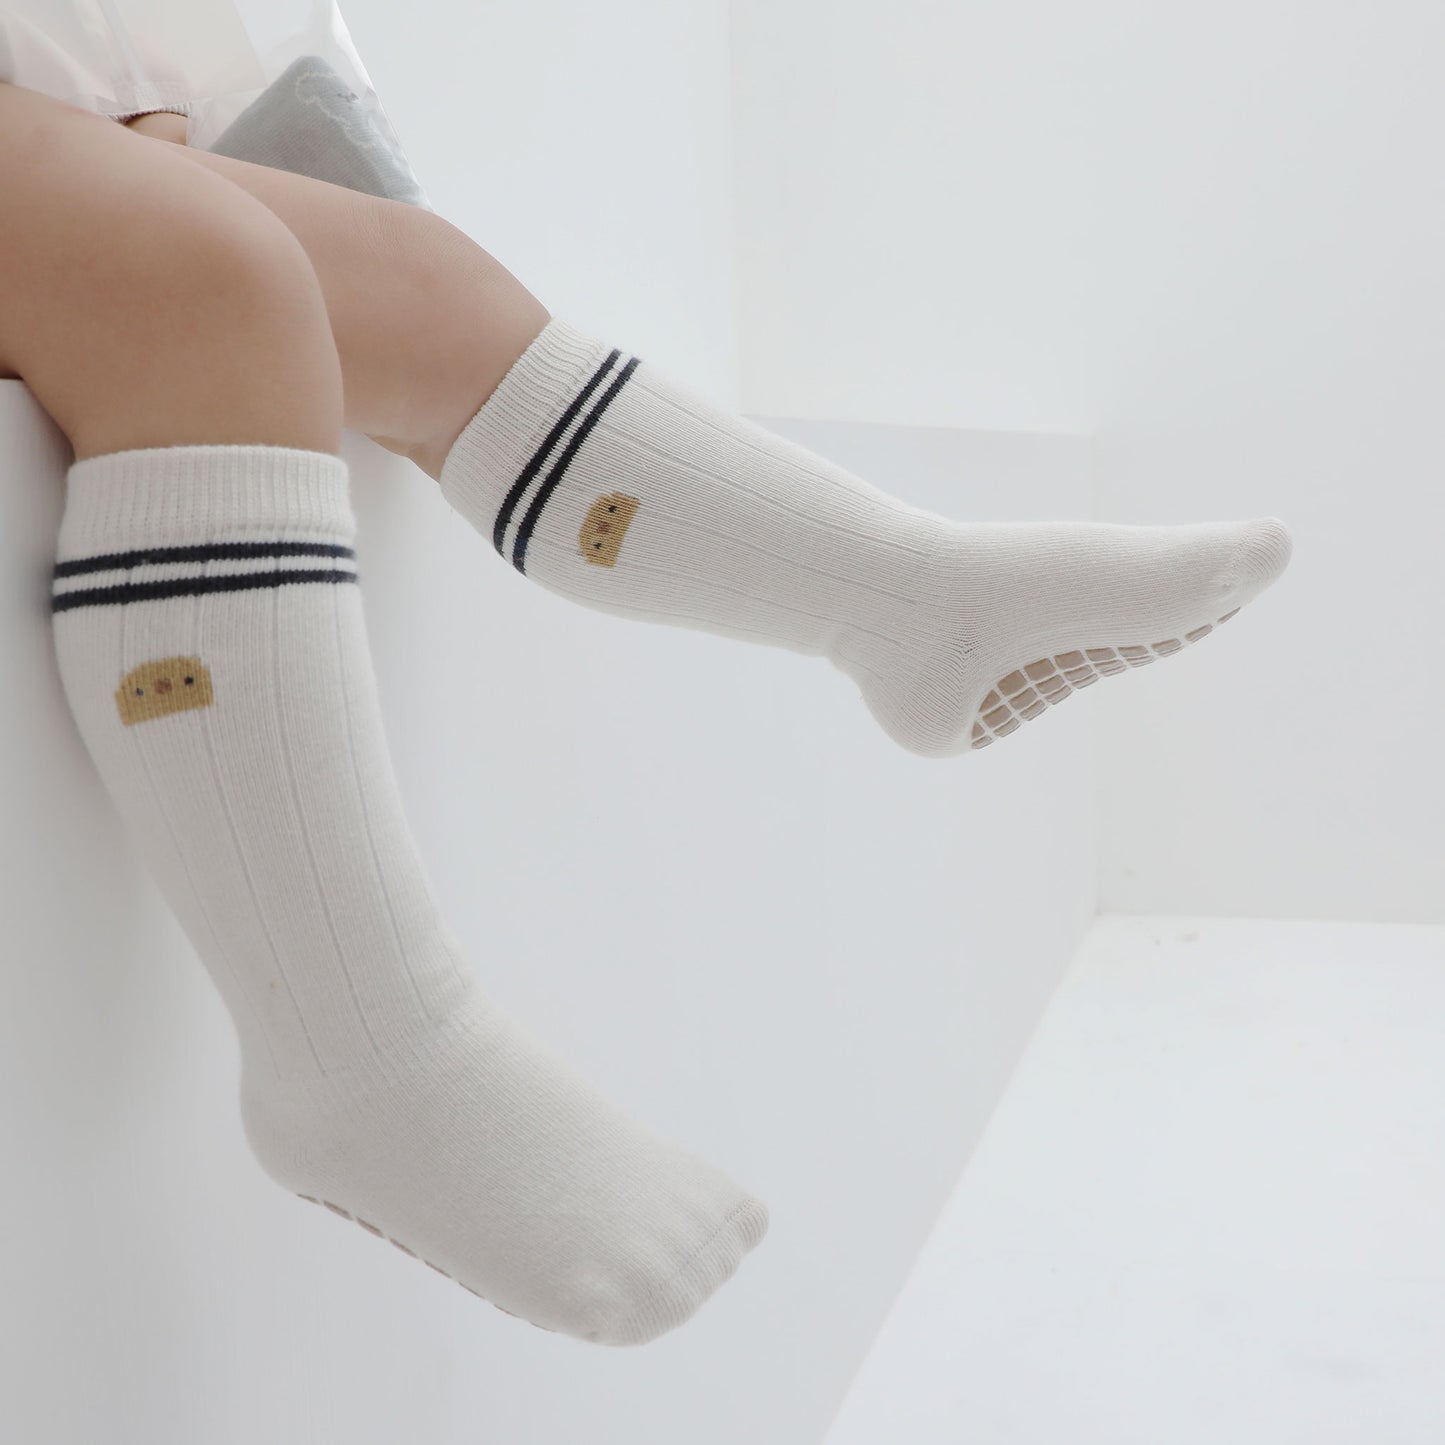 New- Sports Day- 5 Pairs of Stay-On Baby & Toddler Non-Slip Socks